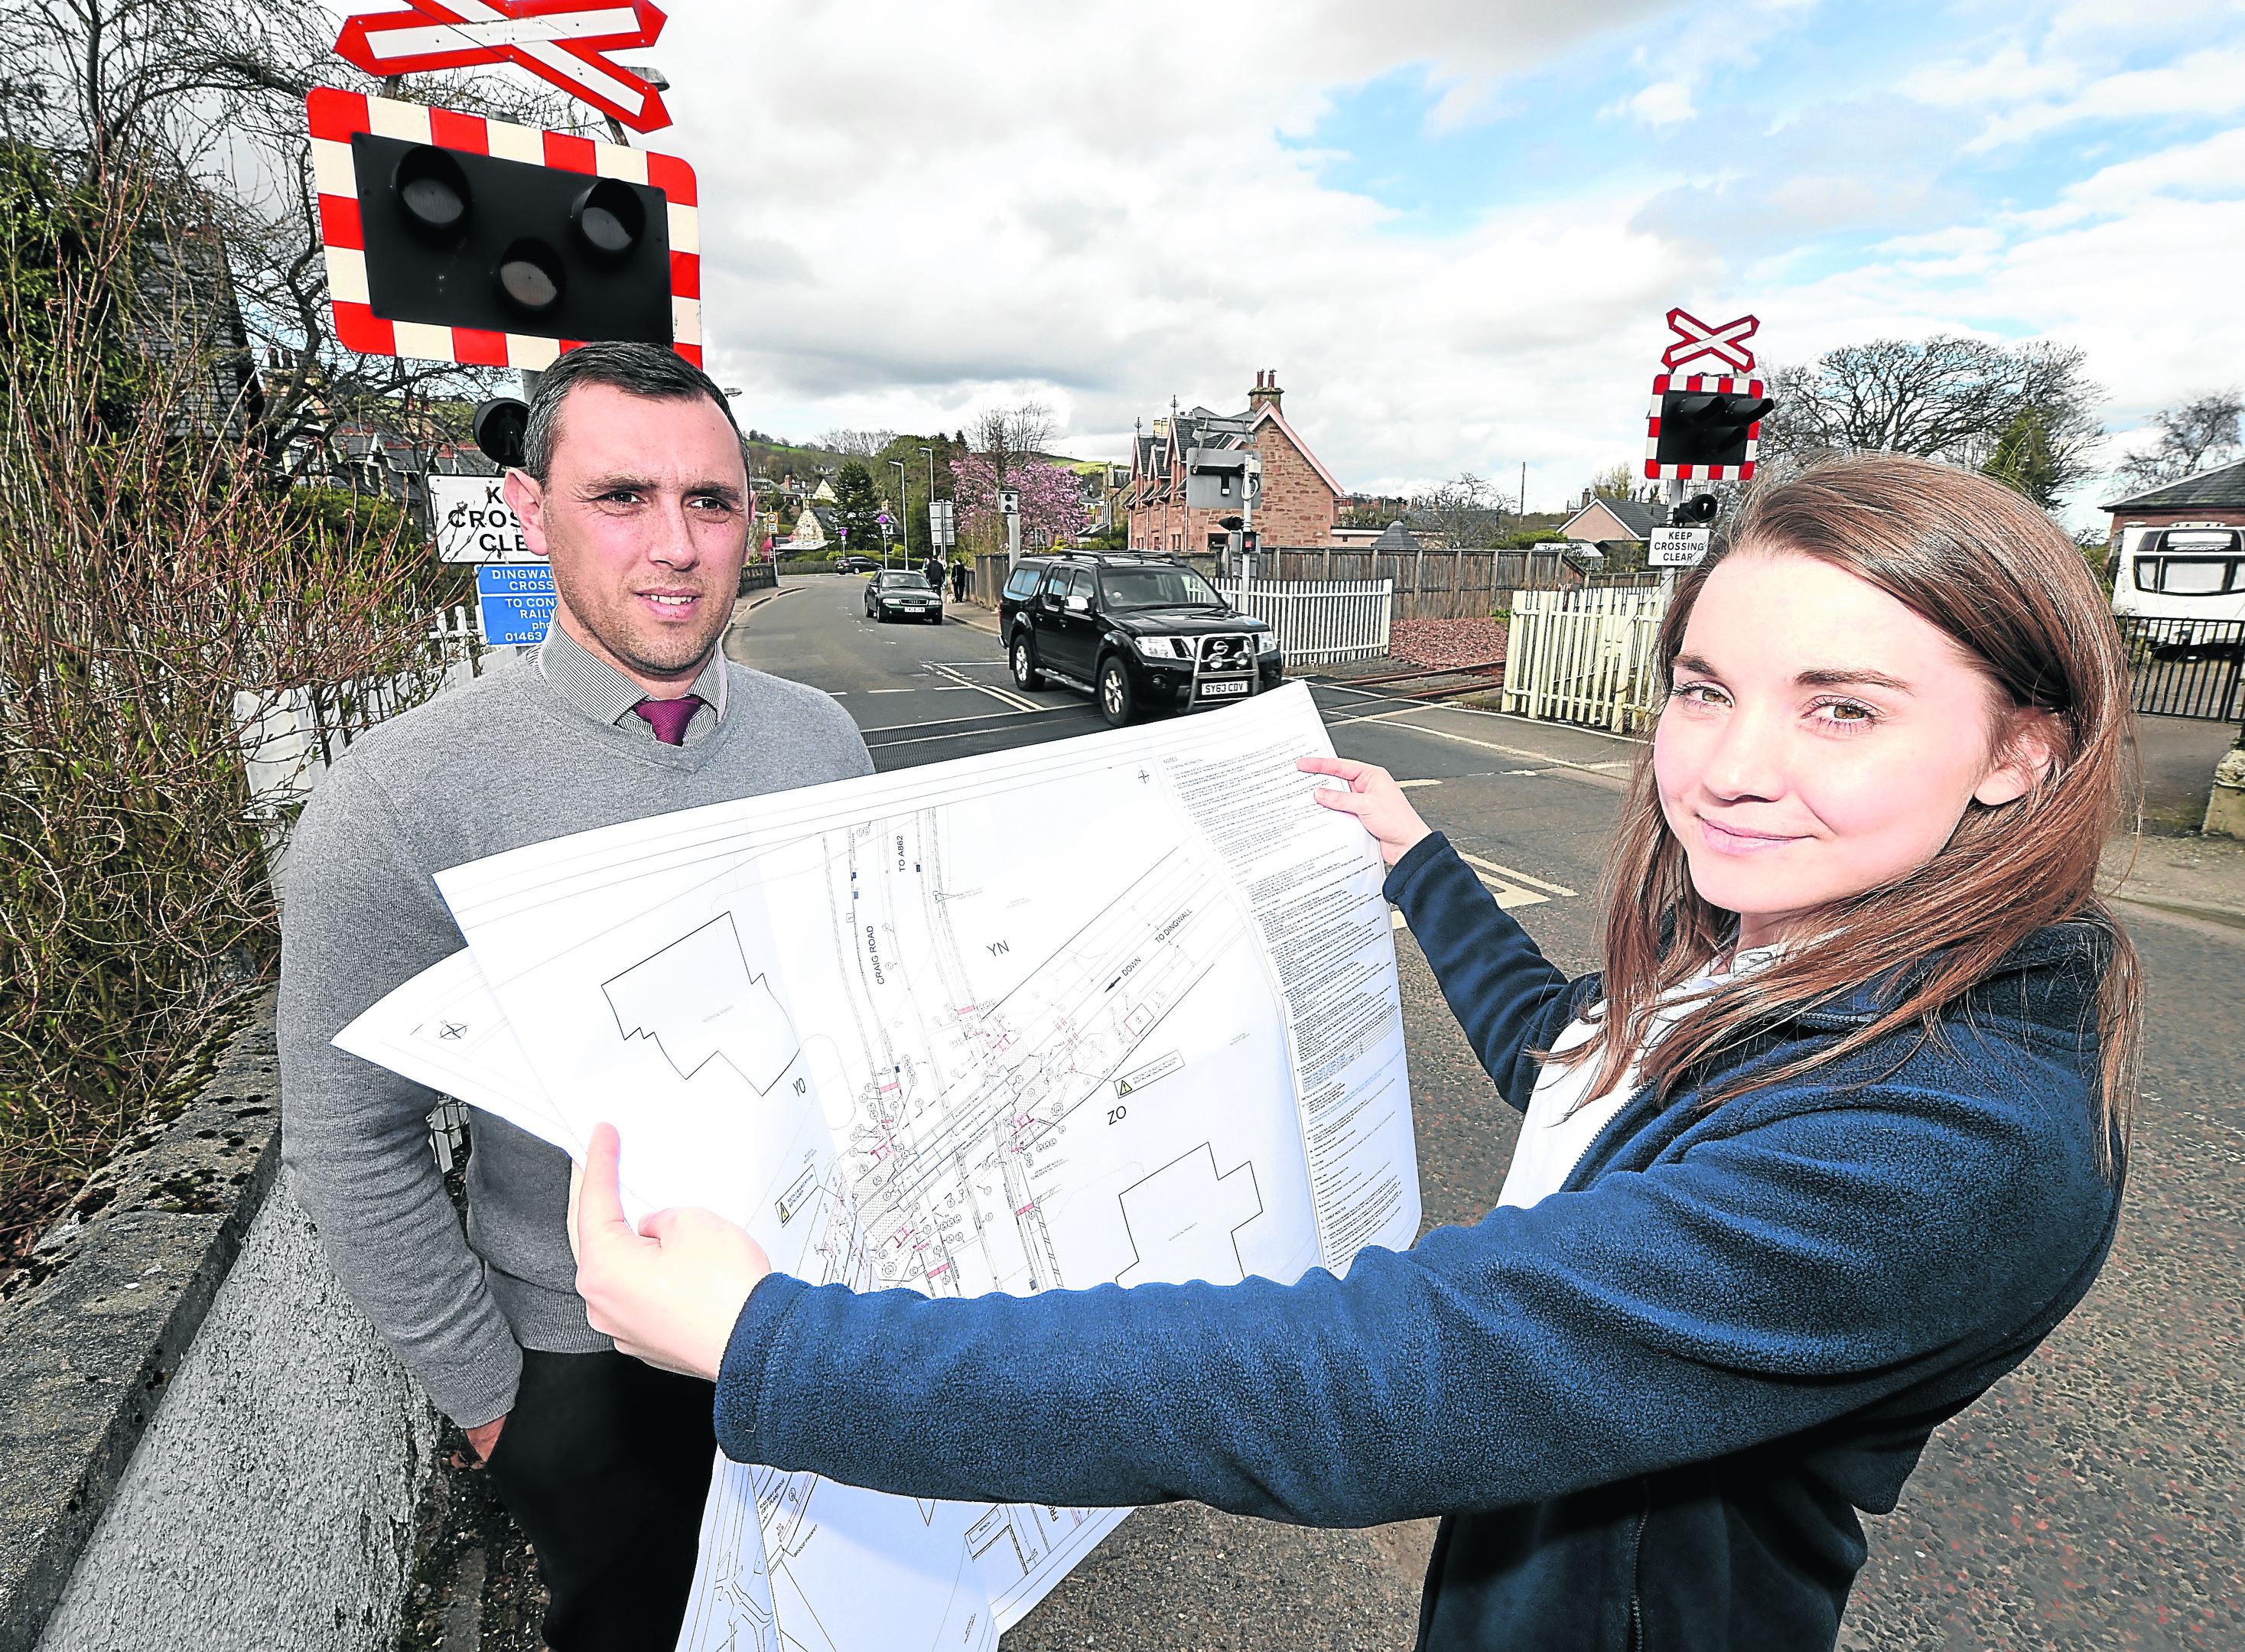 Alice Wilson of Network Rail, Project Manager for the installation of barriers over the Dingwall Number 1 and Dingwall Middle level crossings which are due to begin shortly. Also in the photograph is Brian MacLeod, Area Level Crossings Manager with Network Rail.